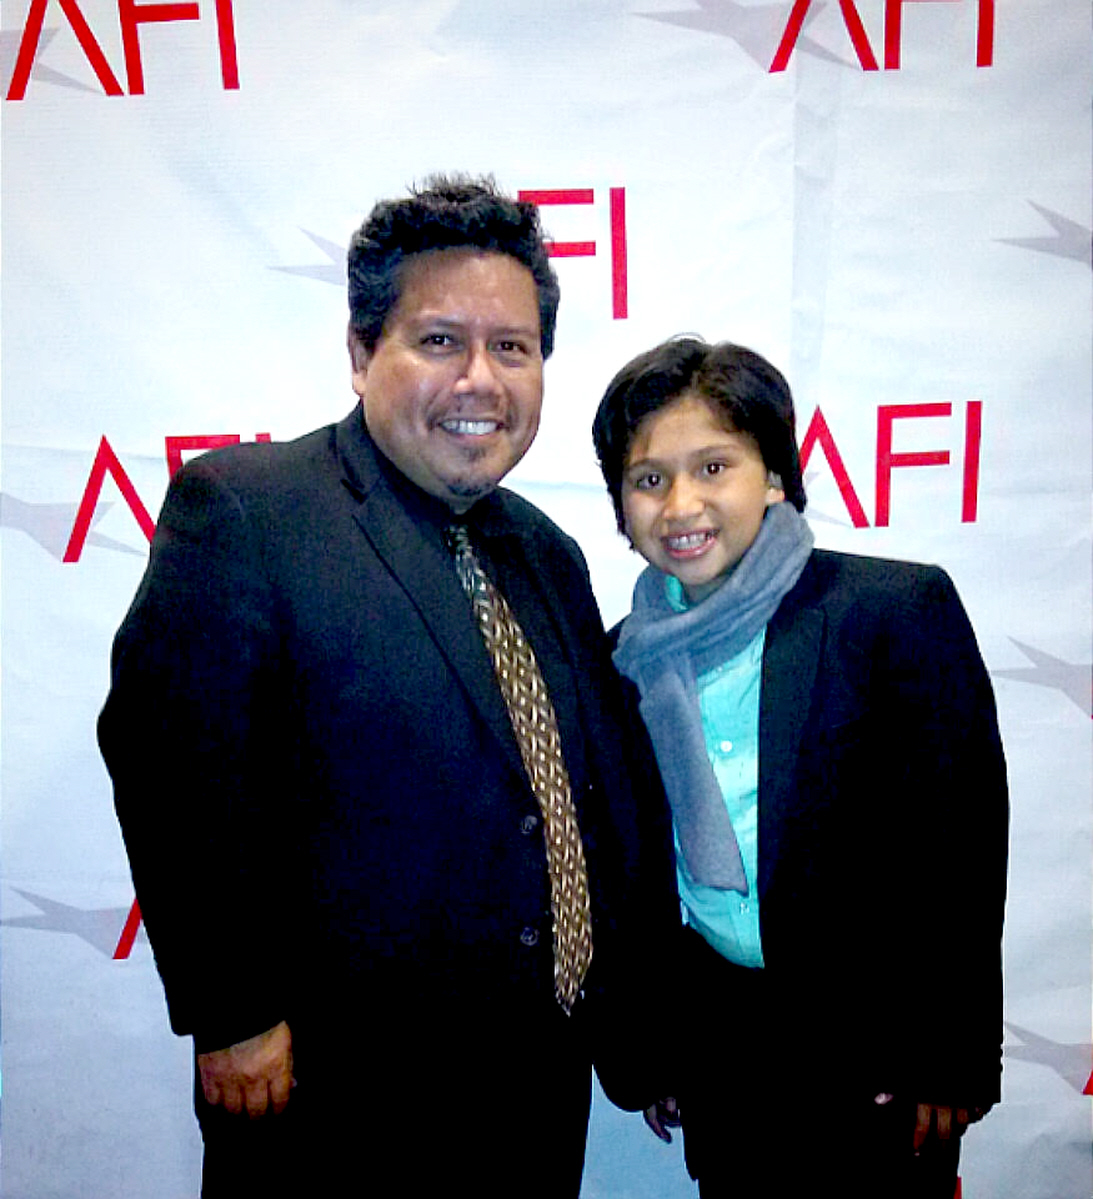 At the AFI premiere of 